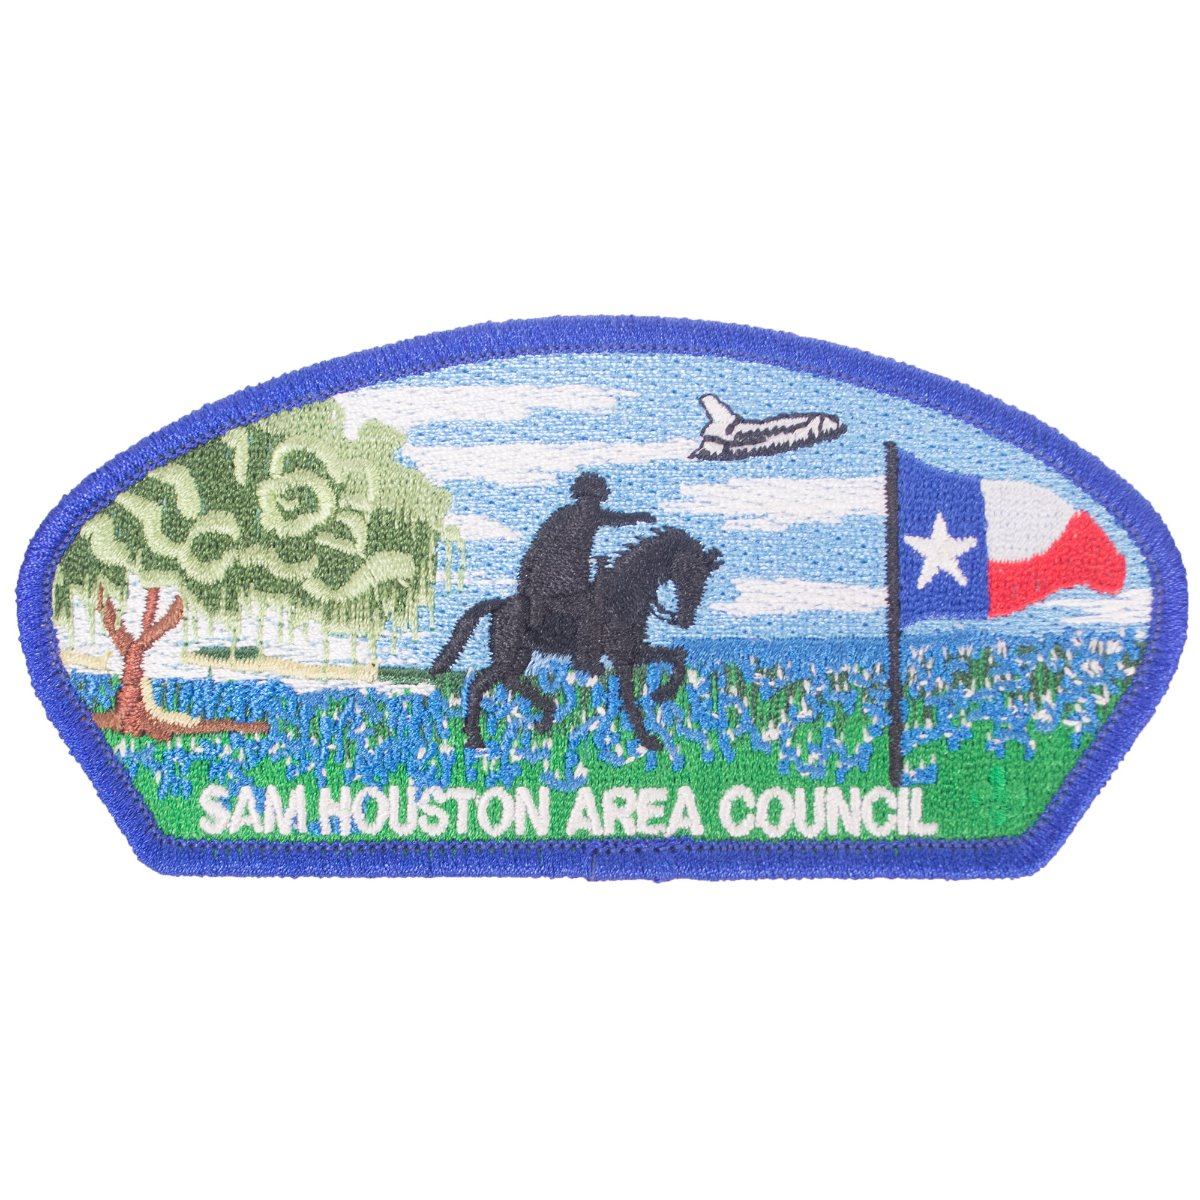 Boy Scouts BSA Sam Houston Area Council Scouting for Food 2011 temporary patch 